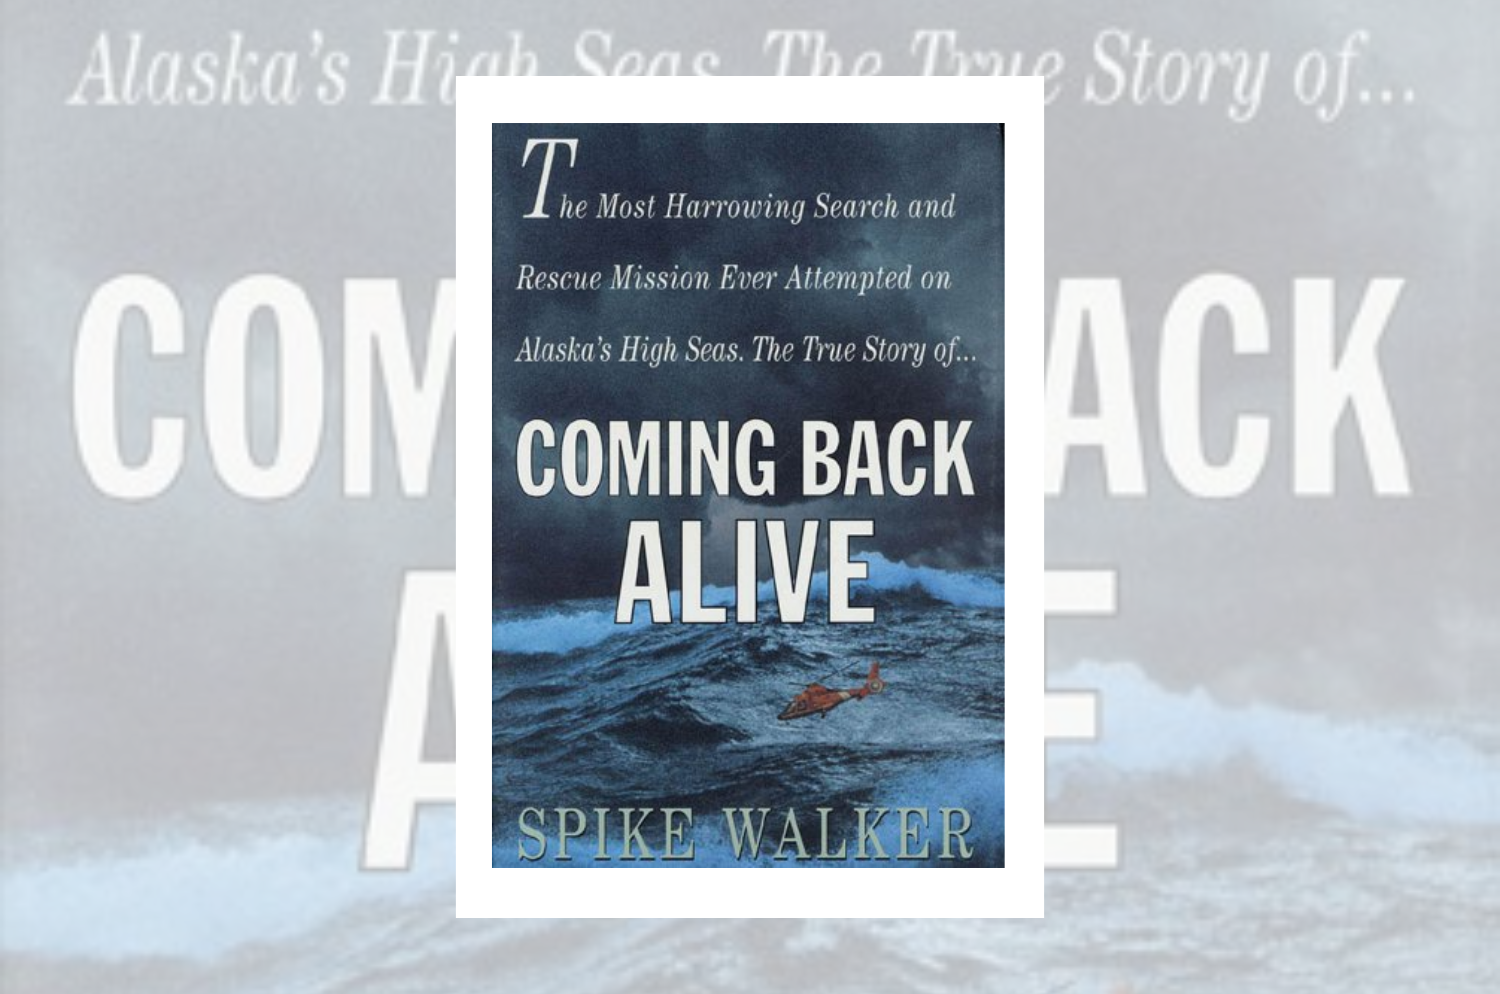 Coming Back Alive: The True Story of the Most Harrowing Search and Rescue Mission Ever Attempted on Alaska’s High Seas” by Spike Walker